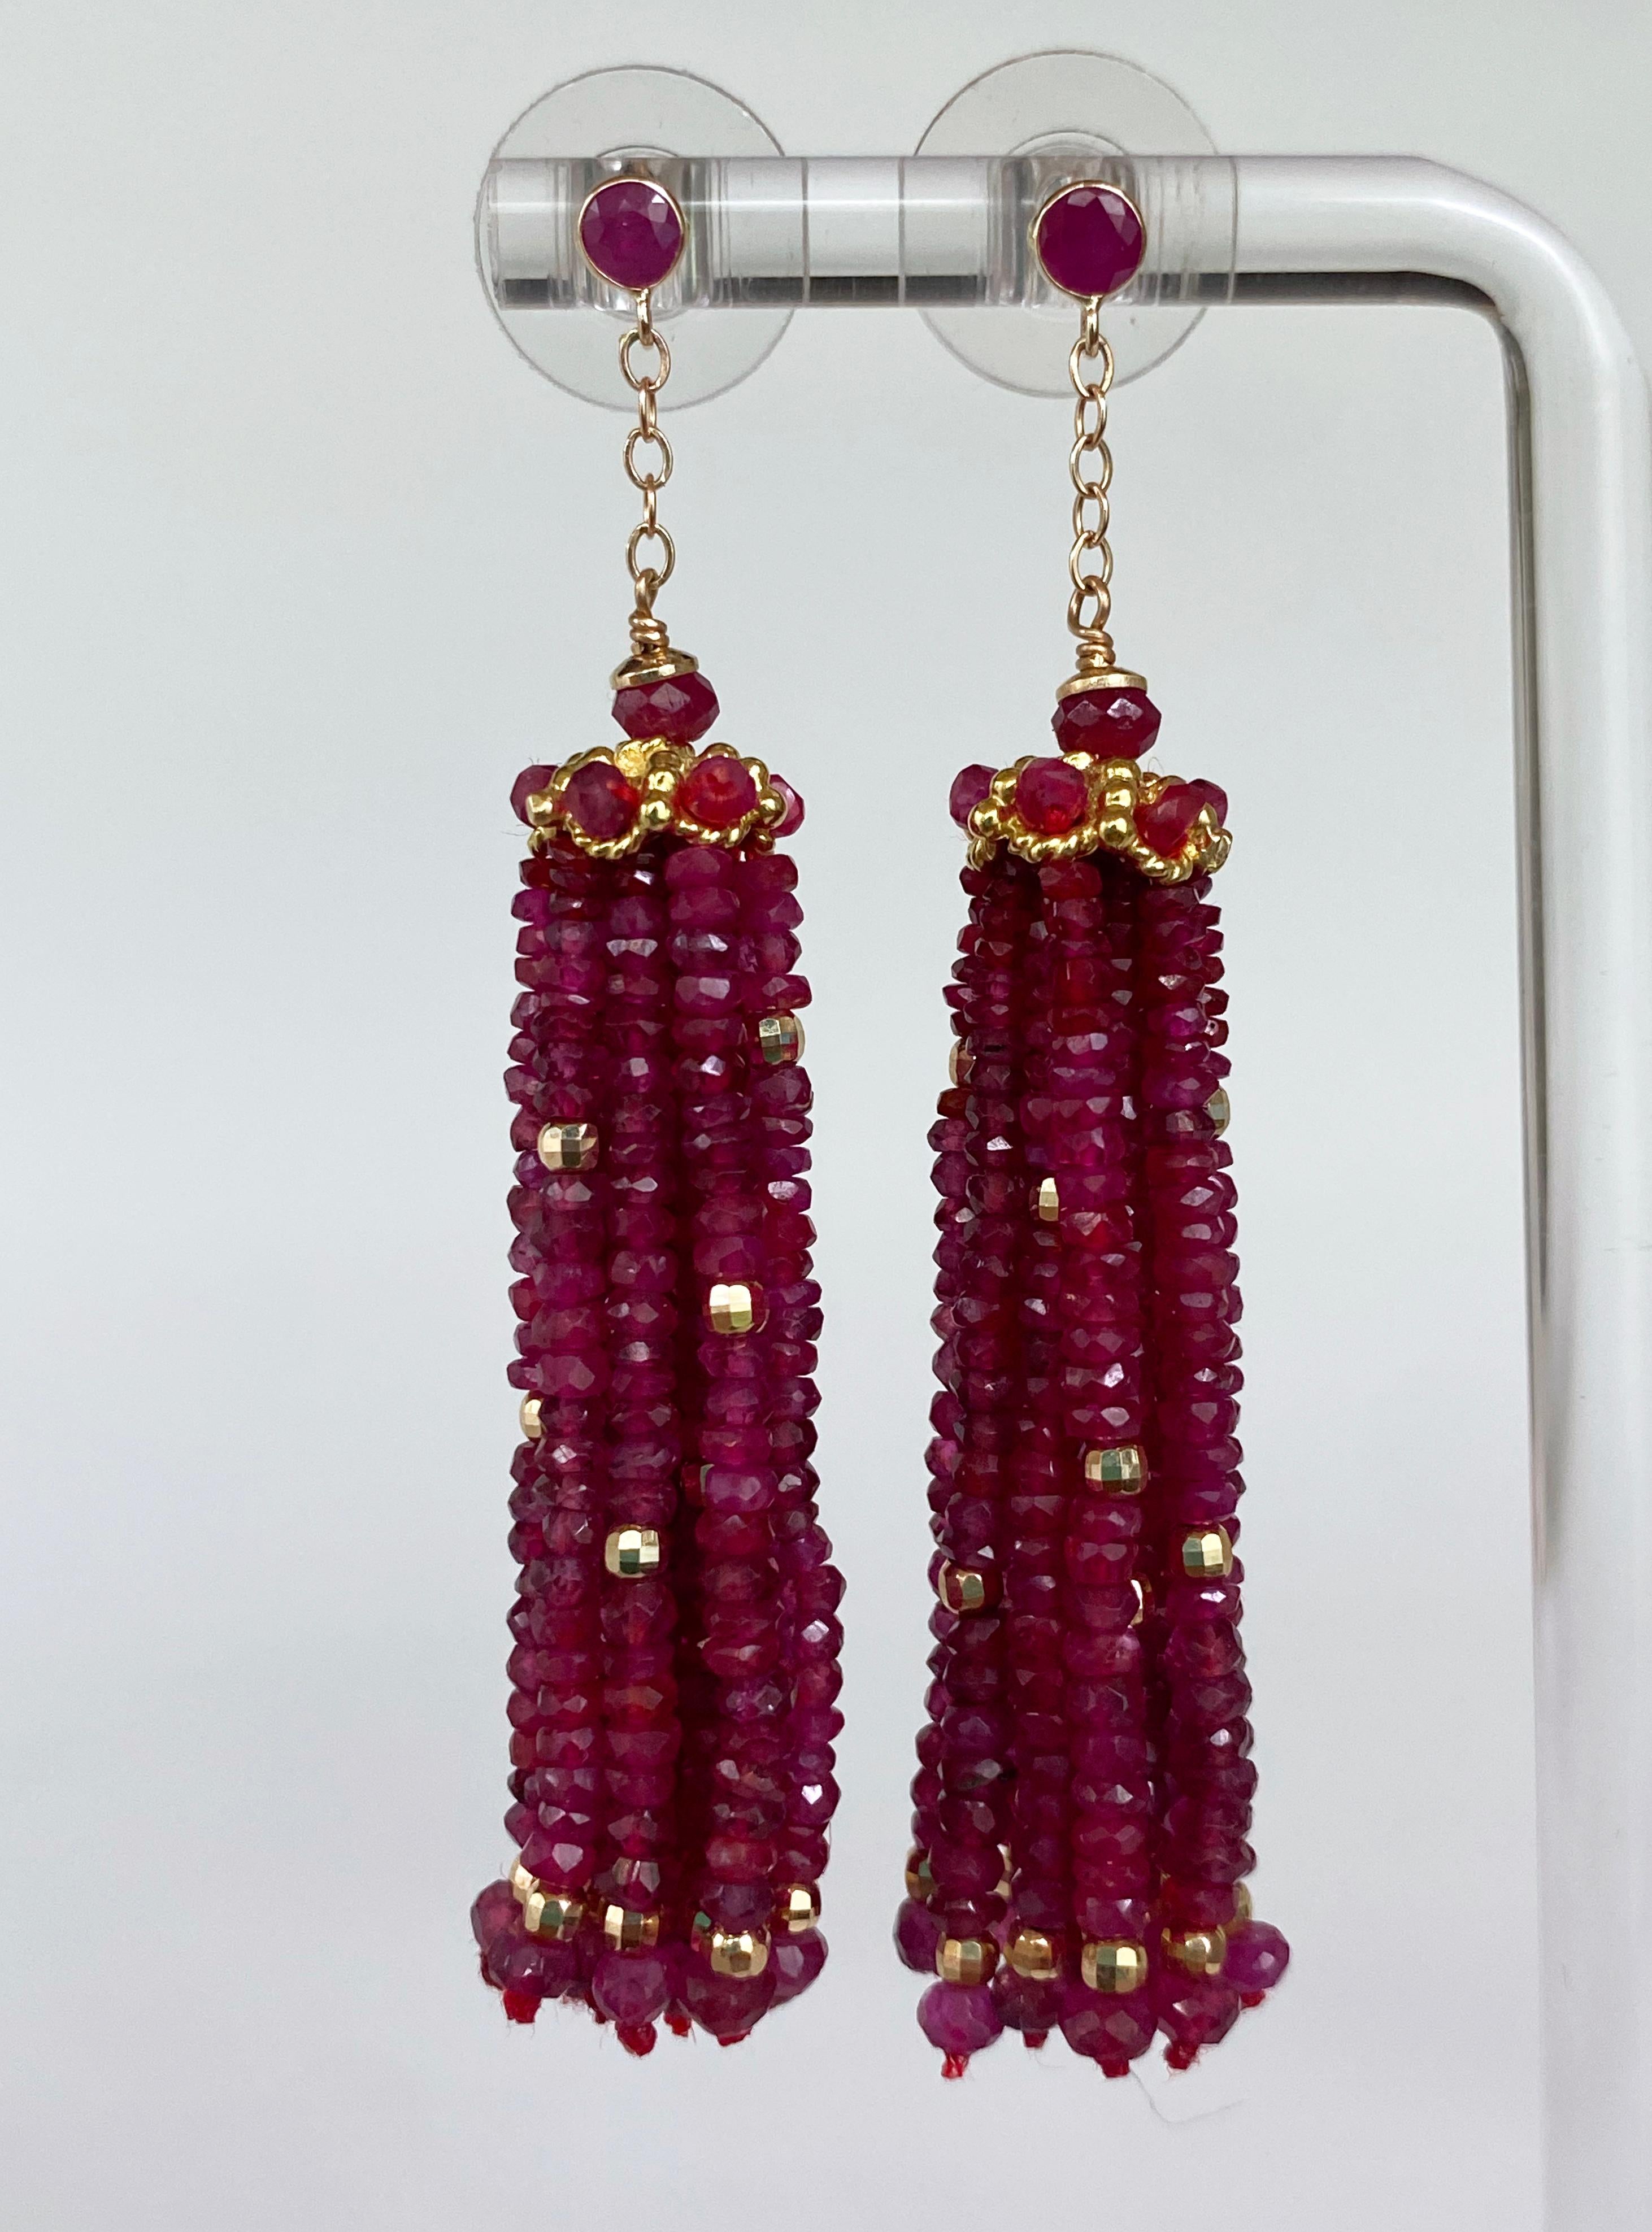 Stunning pair by Marina J. This striking set of earrings is made up of entirely solid 14k Yellow Gold and Faceted Rubies. A small Ruby sits atop a solid 14k Yellow Gold decorative Cup, which is adorned by Faceted Rubies encrusted within. From this